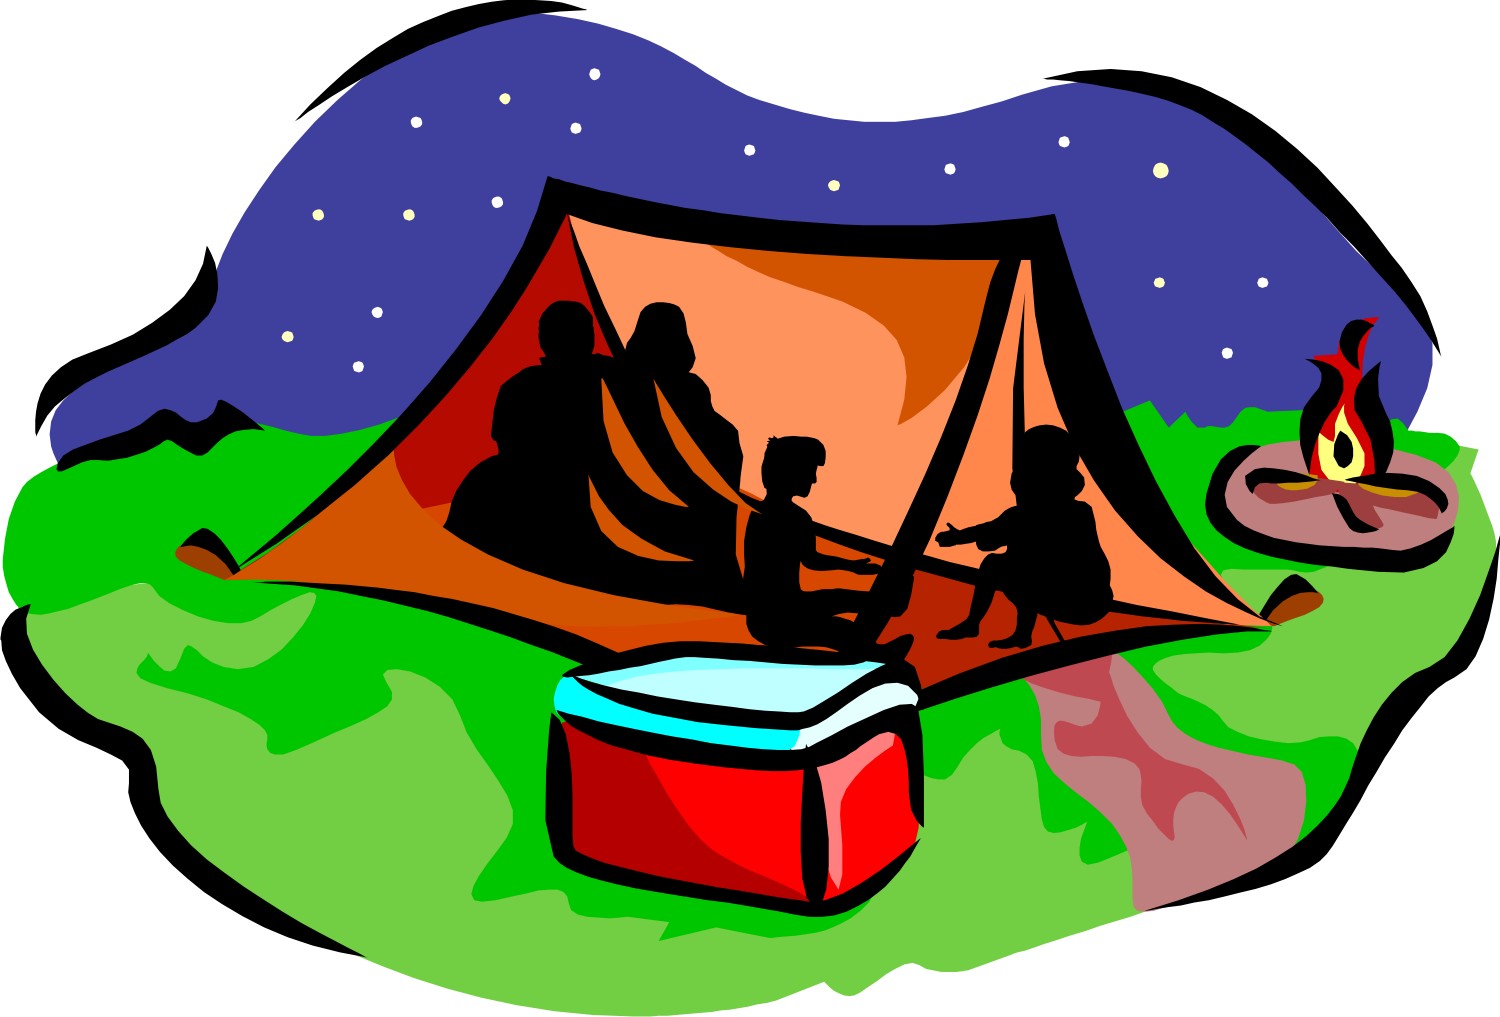 Camping rv clipart free clip art image image